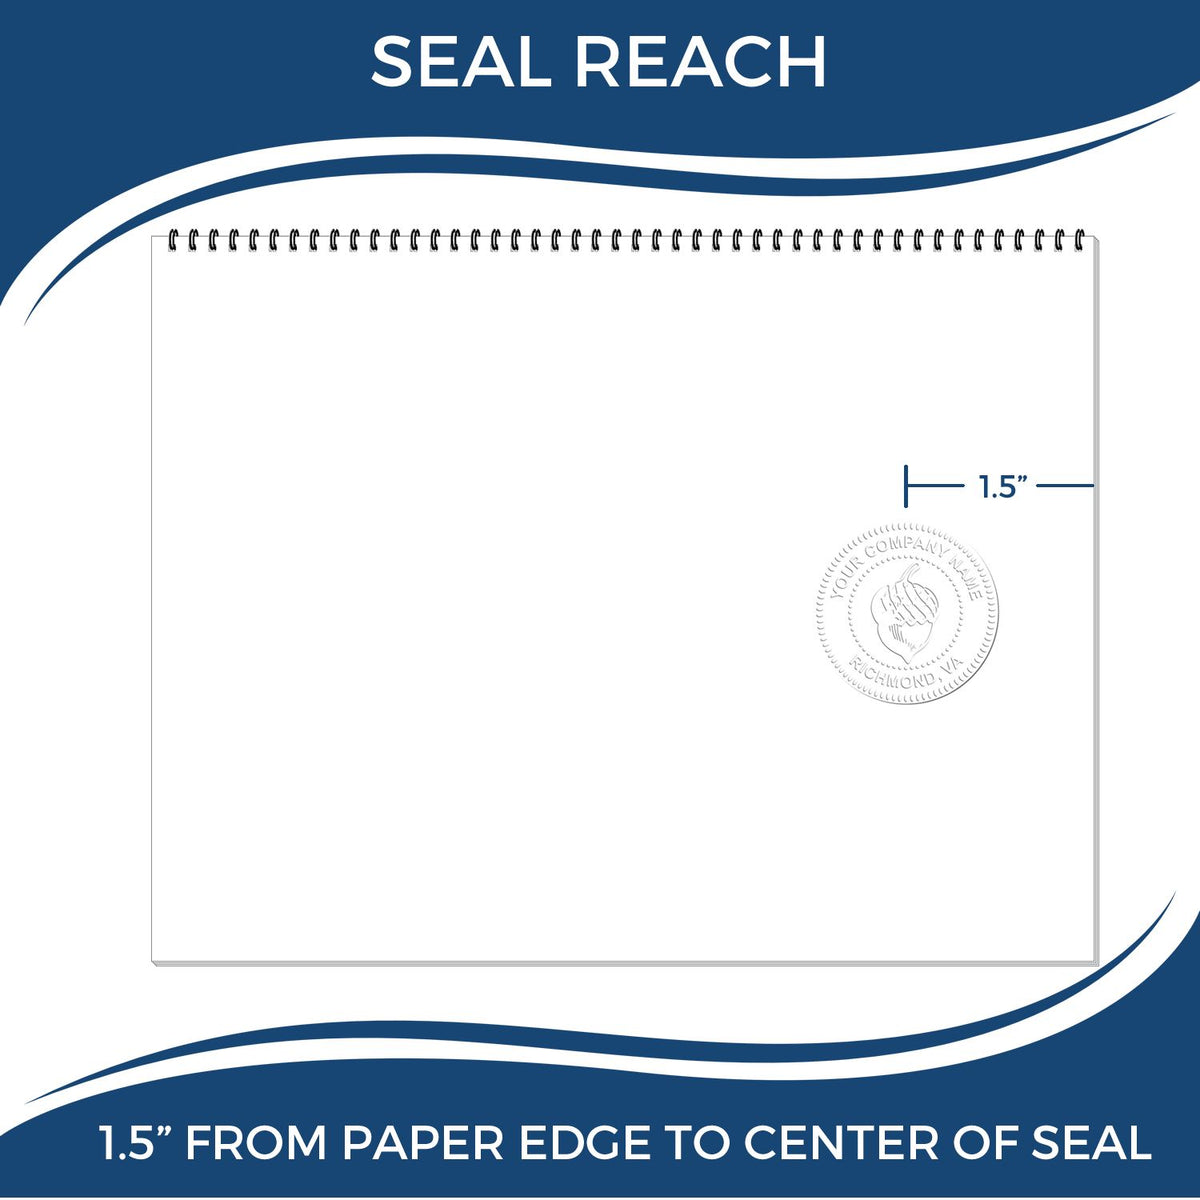 An infographic showing the seal reach which is represented by a ruler and a miniature seal image of the Gift Louisiana Geologist Seal